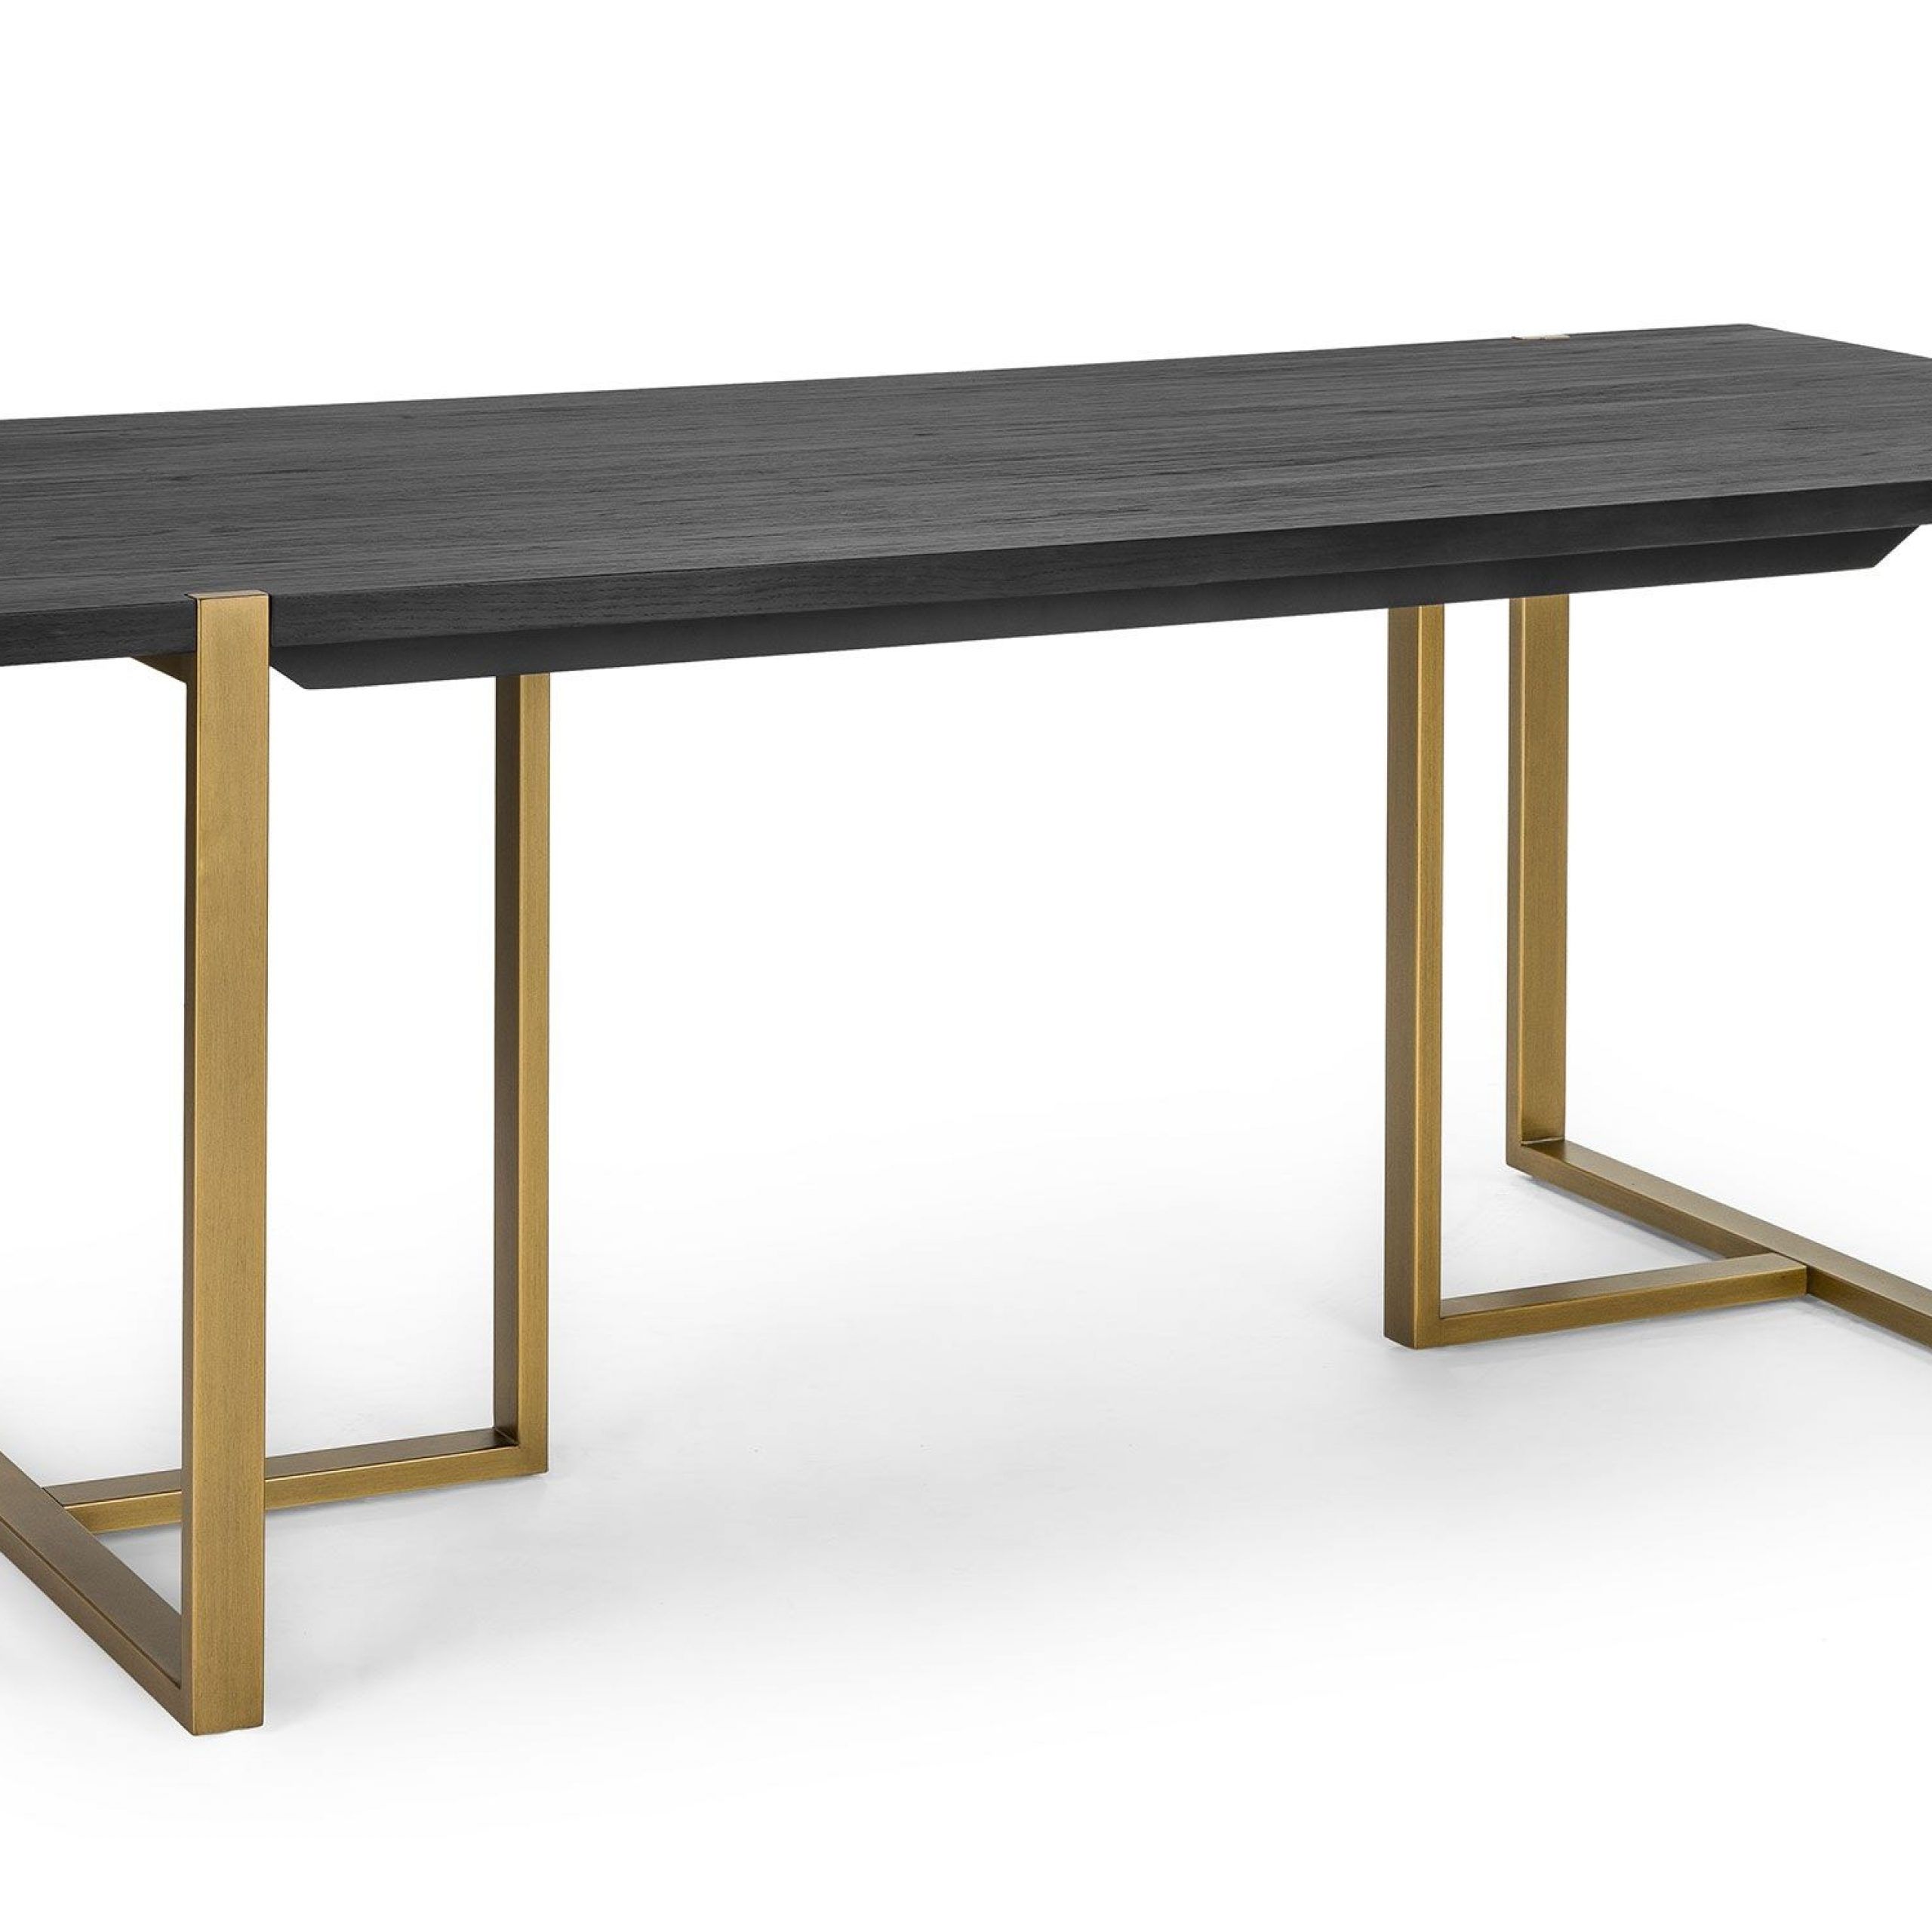 Furniture Design, Modern With Regard To Widely Used Dining Tables In Seared Oak With Brass Detail (View 6 of 25)